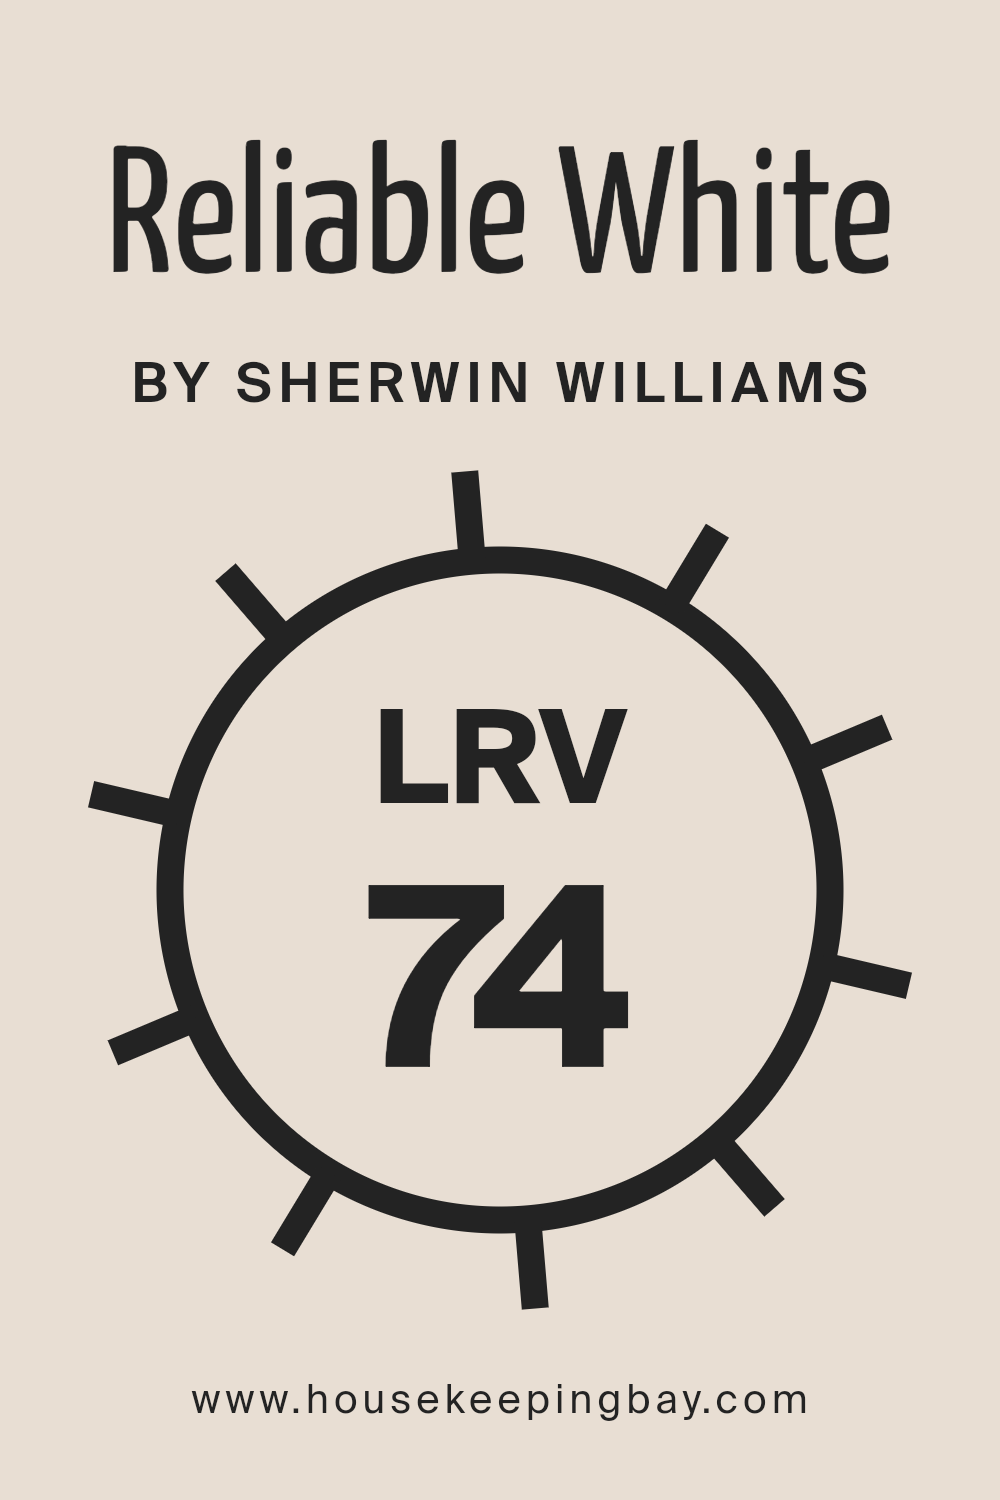 what_is_the_lrv_of_reliable_white_sw_6091